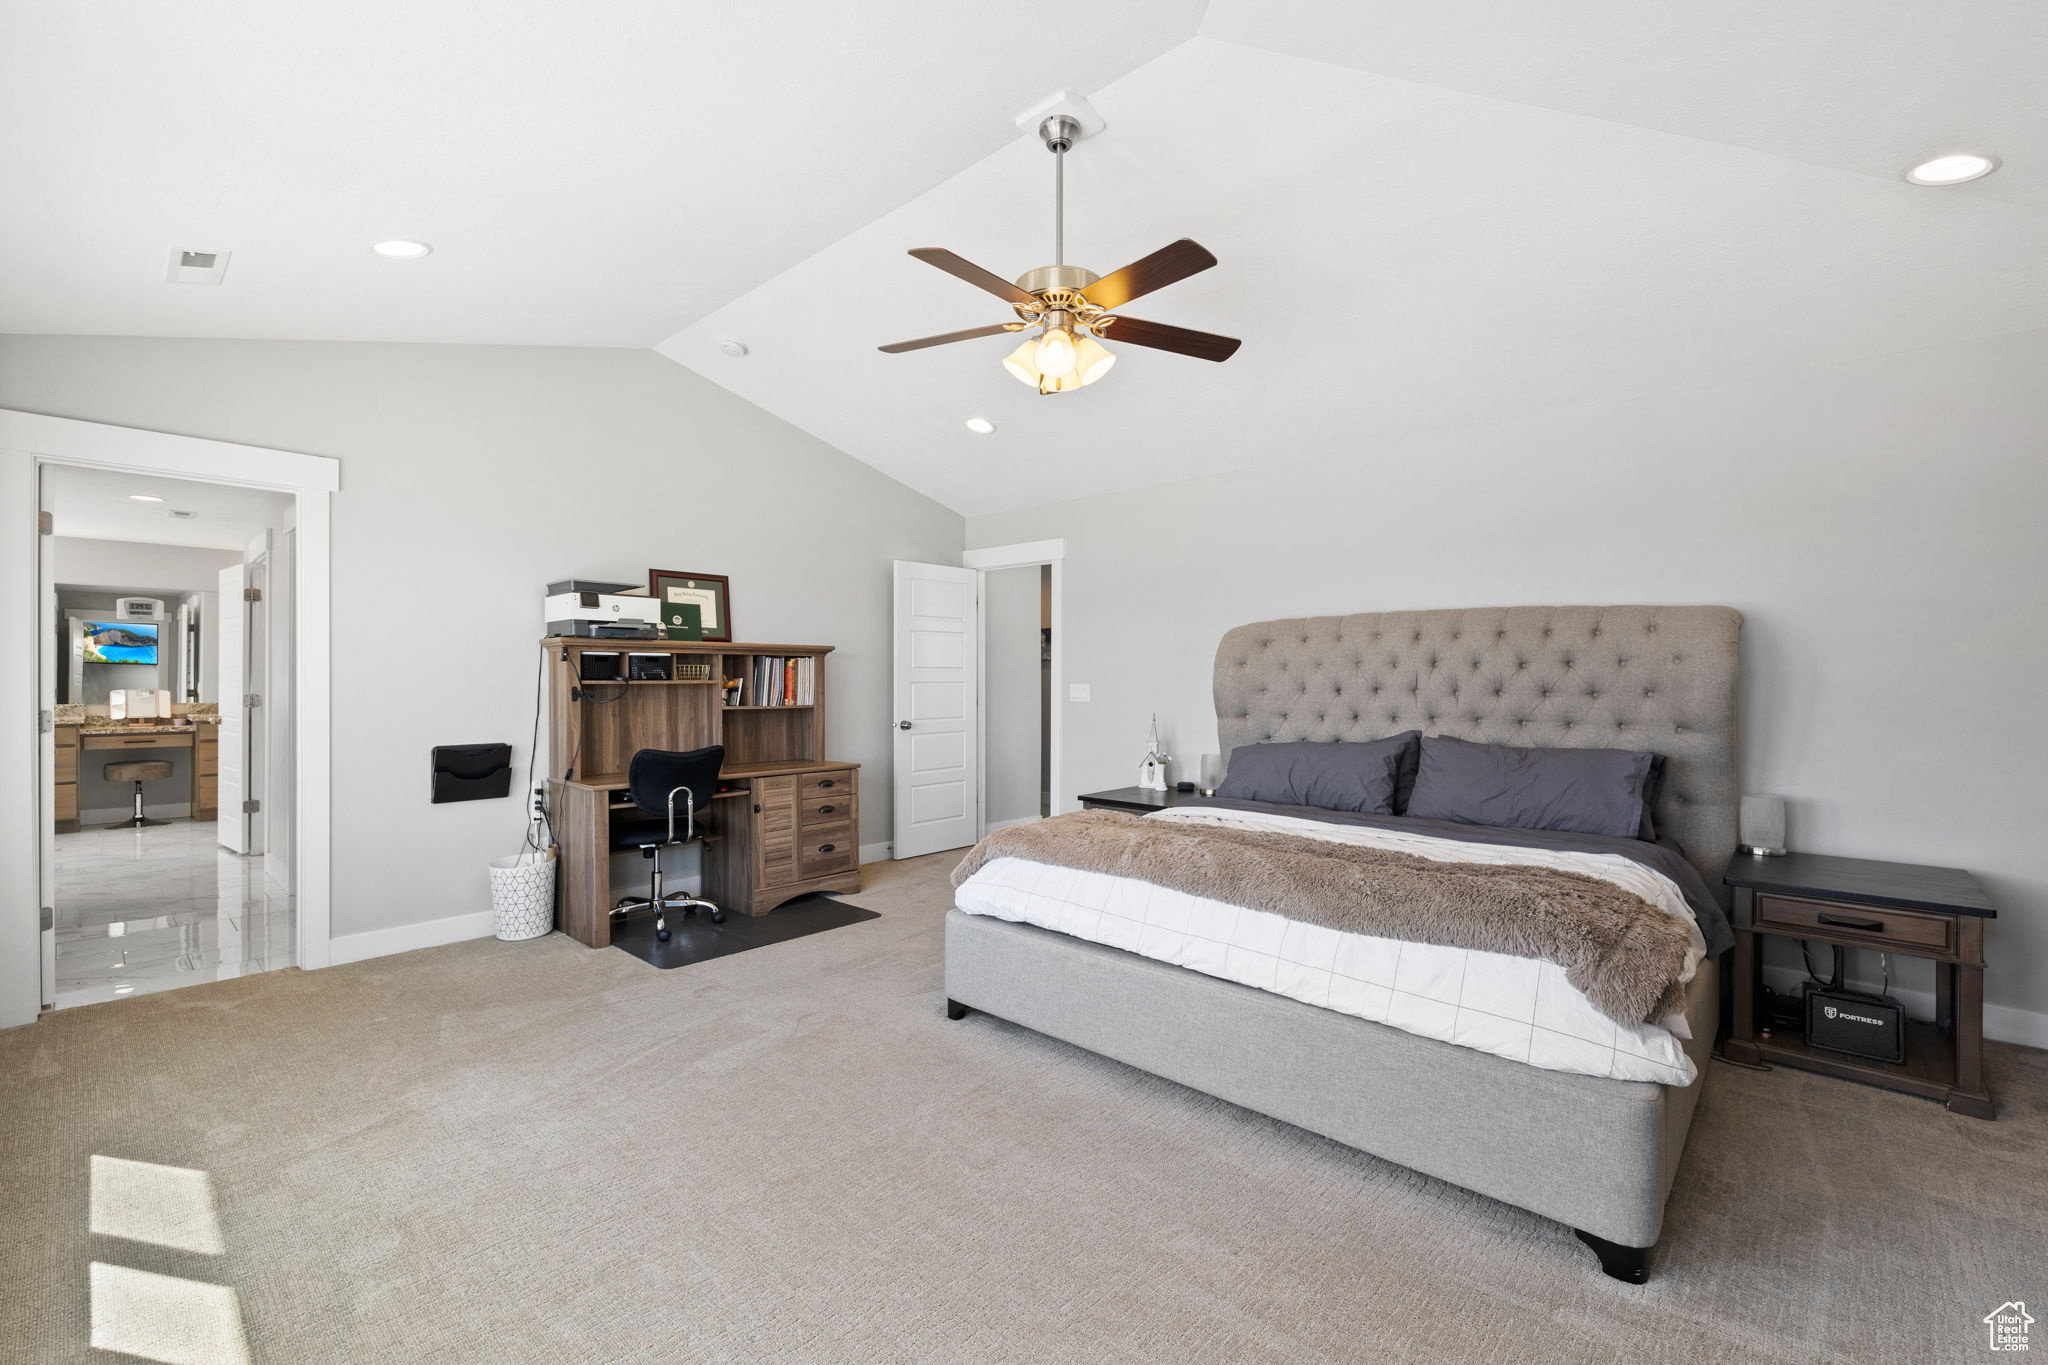 Bedroom with light carpet, ceiling fan, and lofted ceiling